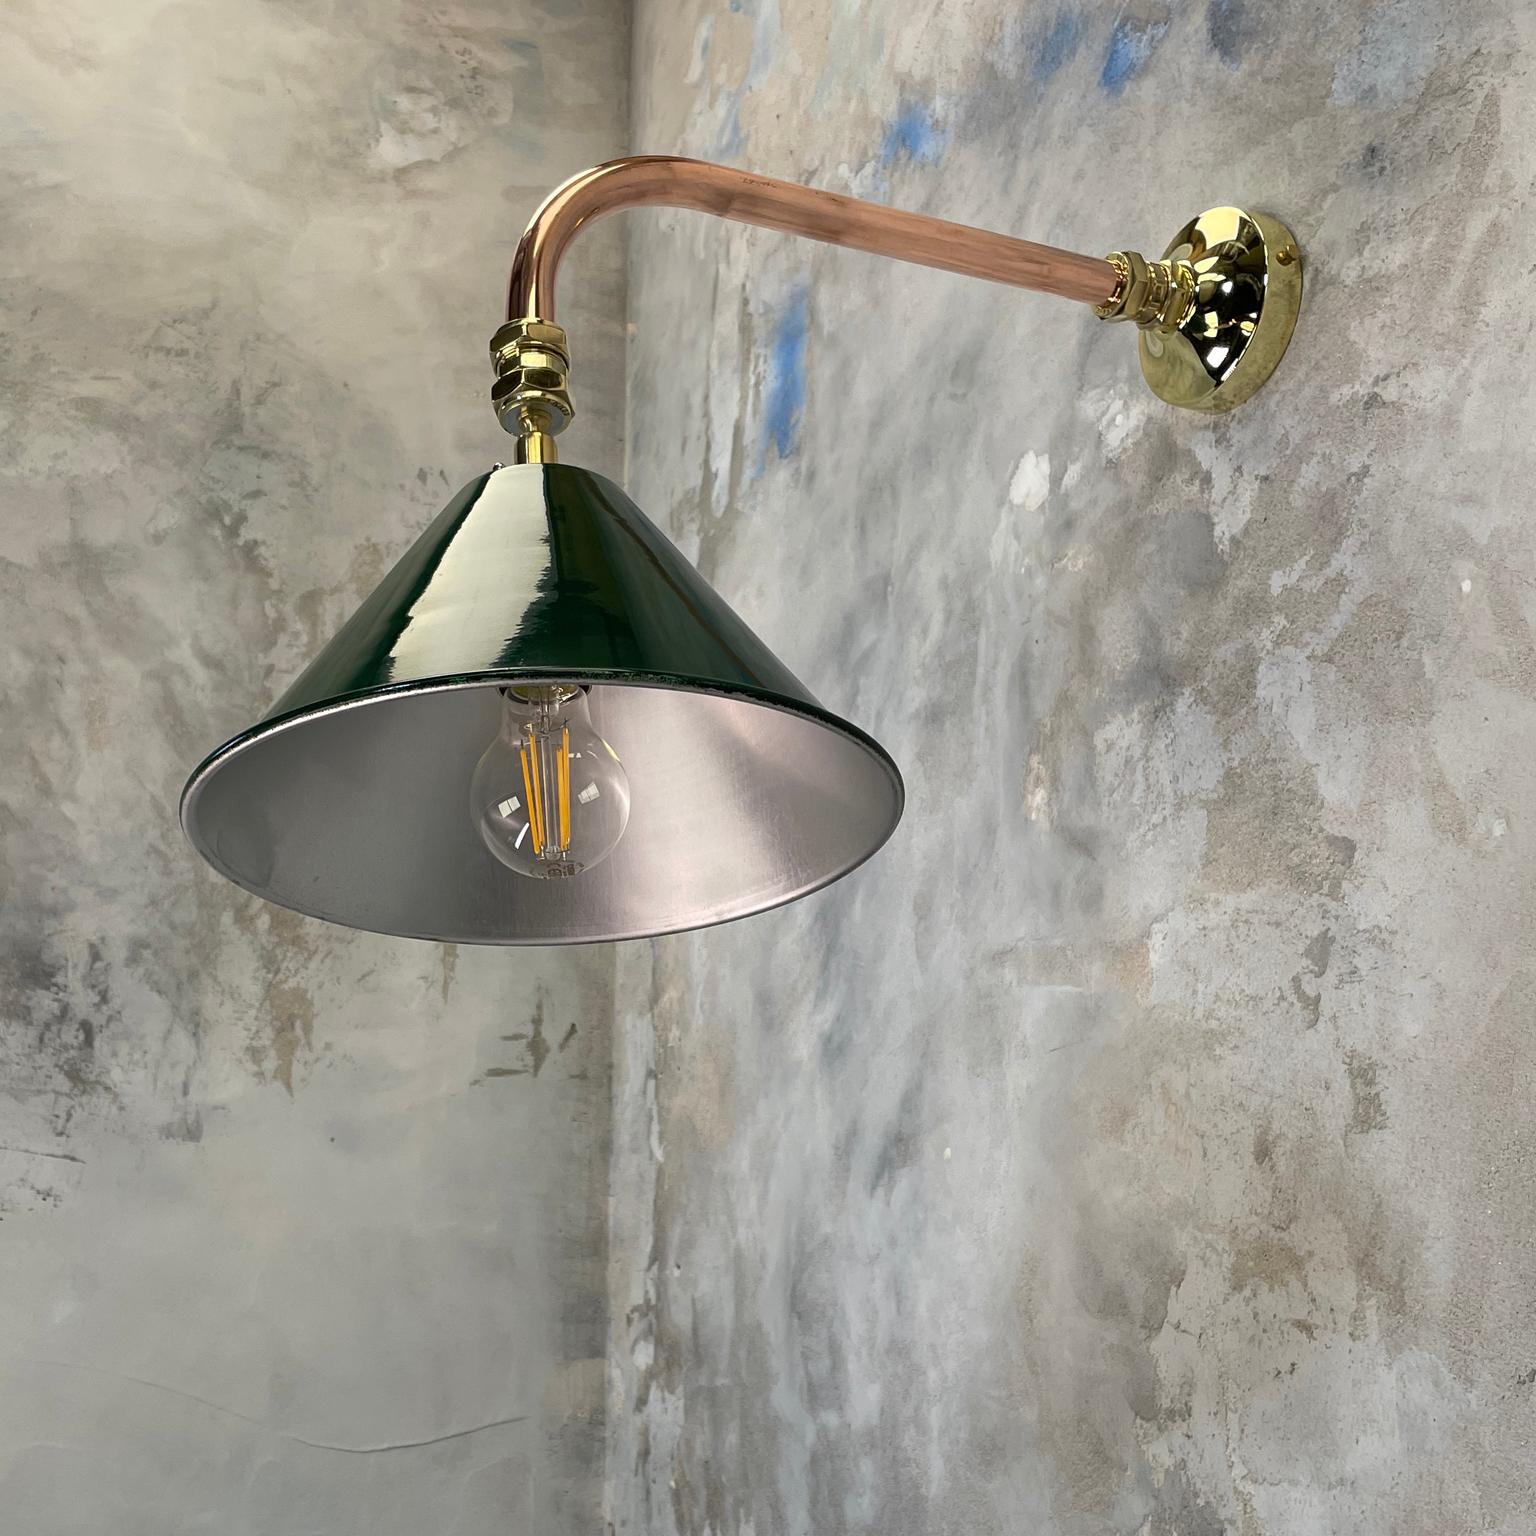 1980's Copper & Brass Cantilever Lamp Green British Army Lamp Shade For Sale 6